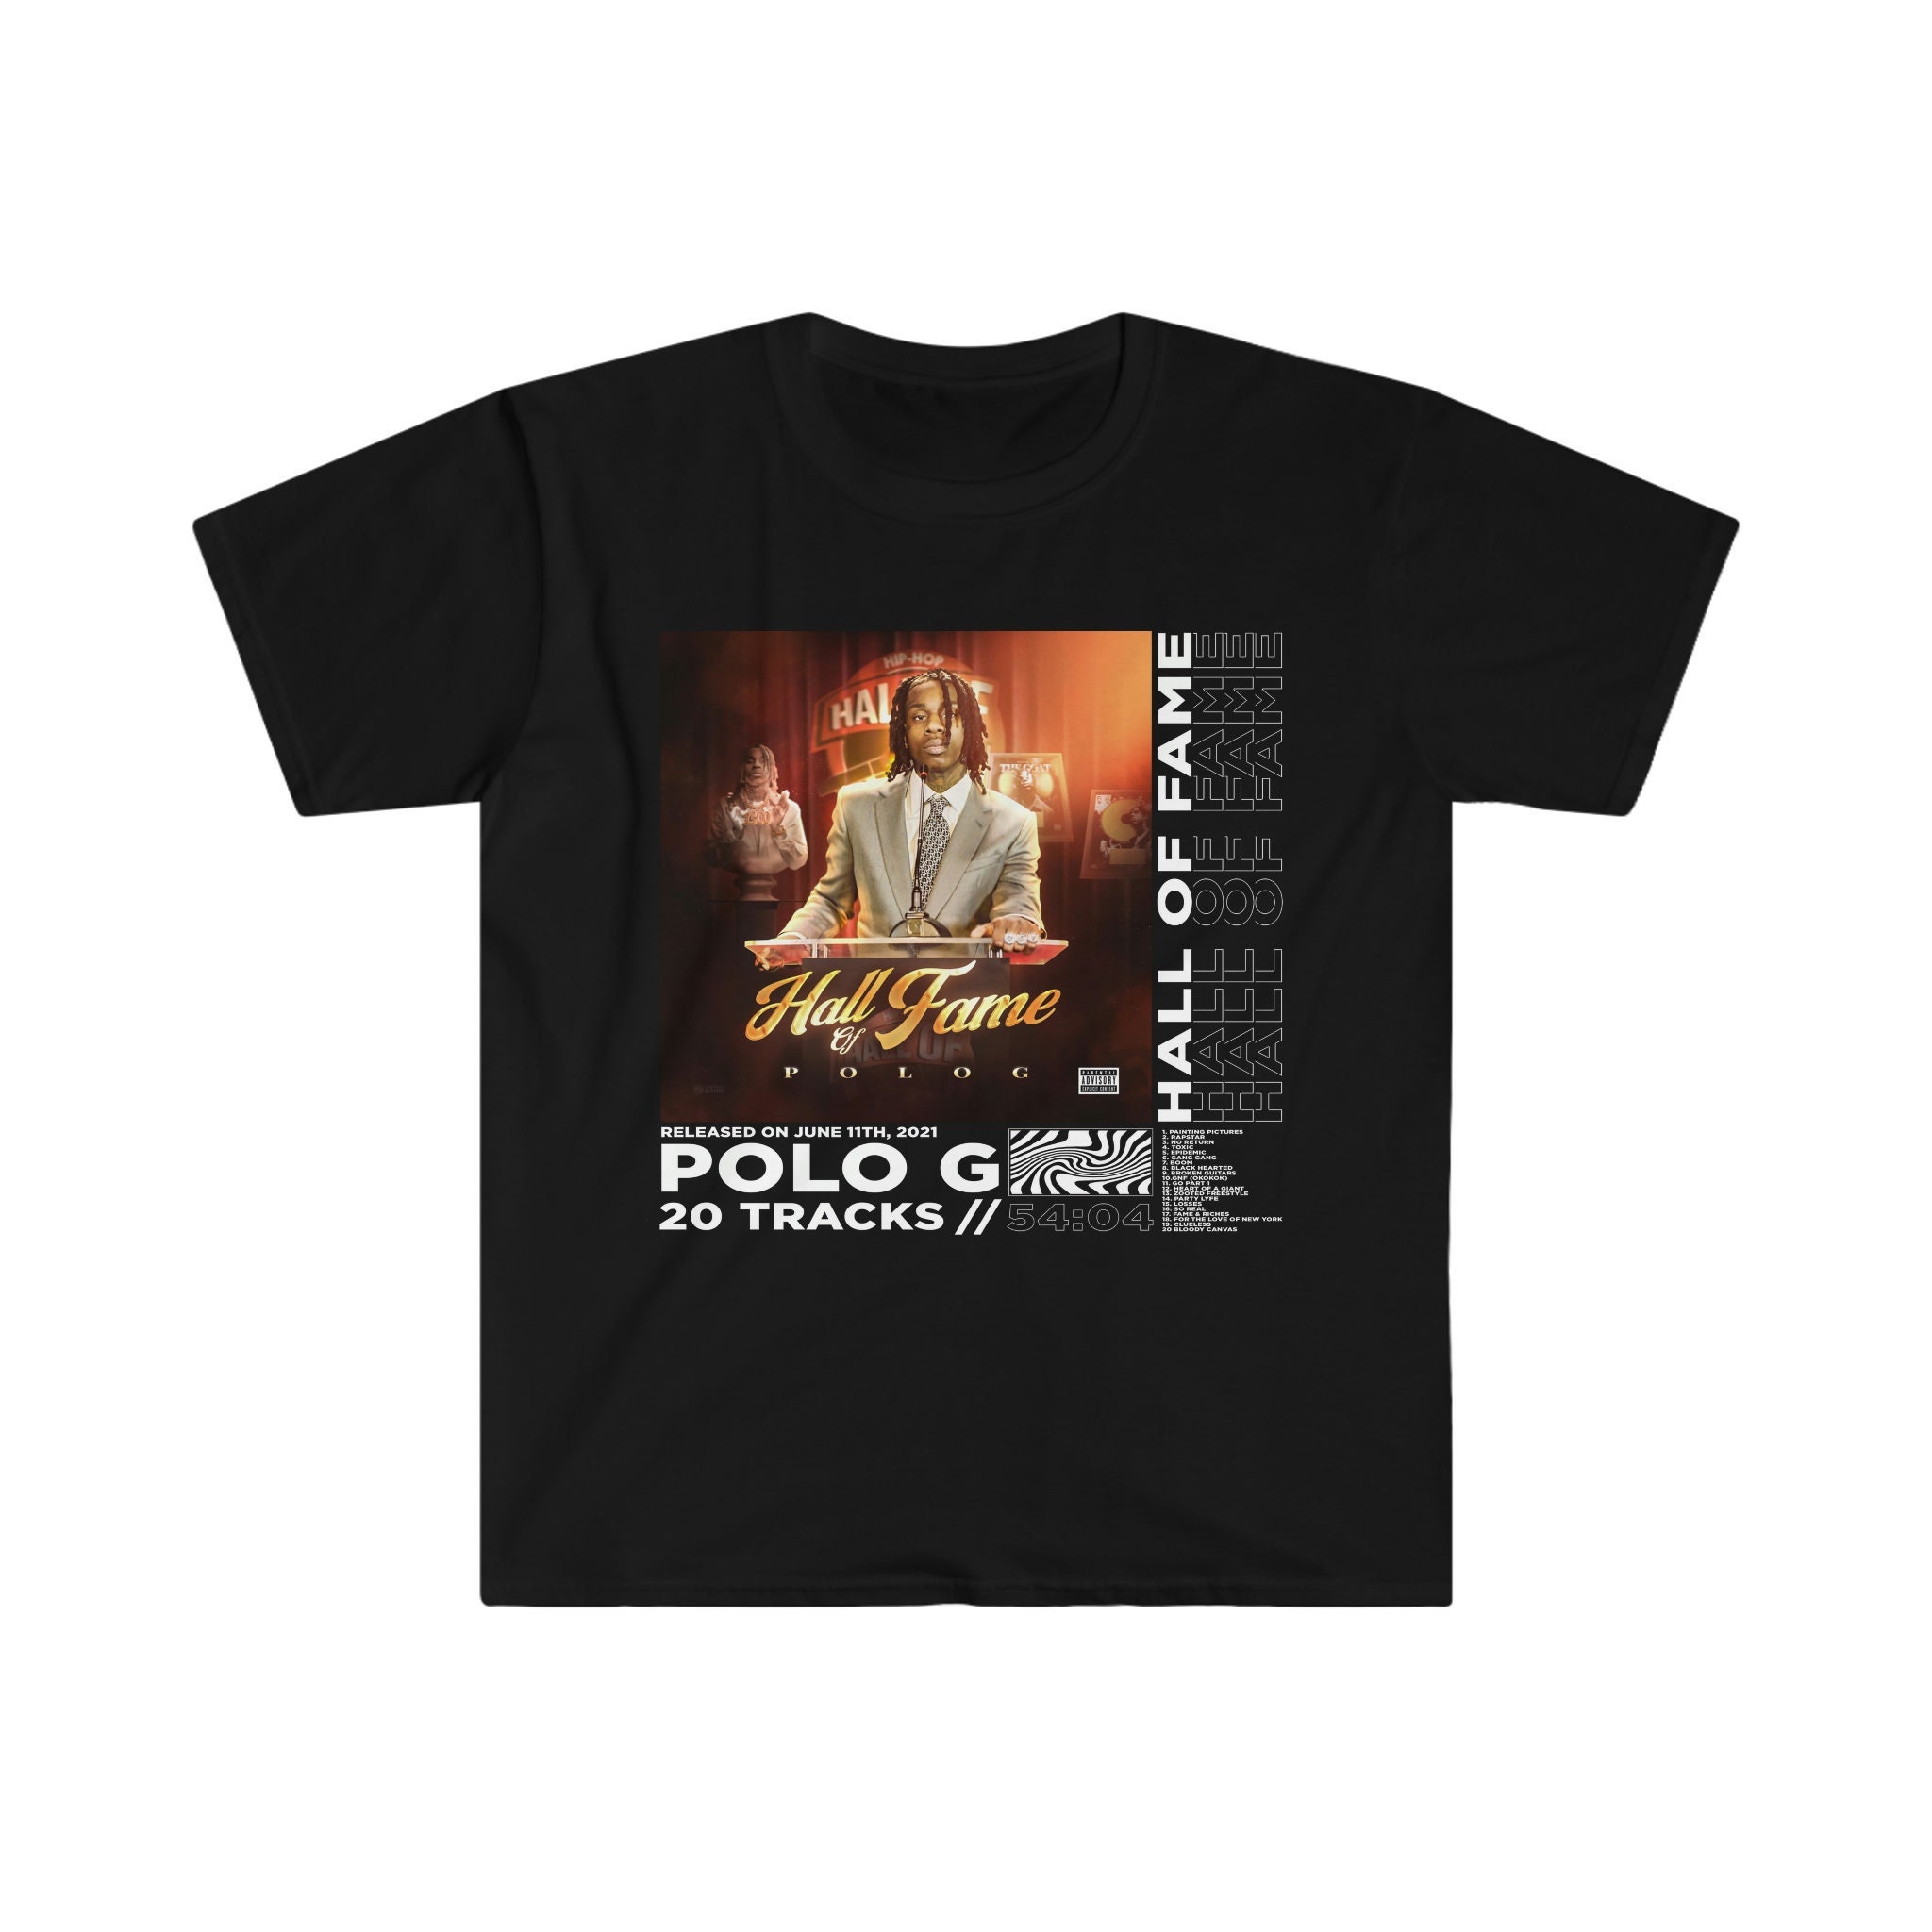 Hall Of Fame Merch Available Now! : r/PoloG